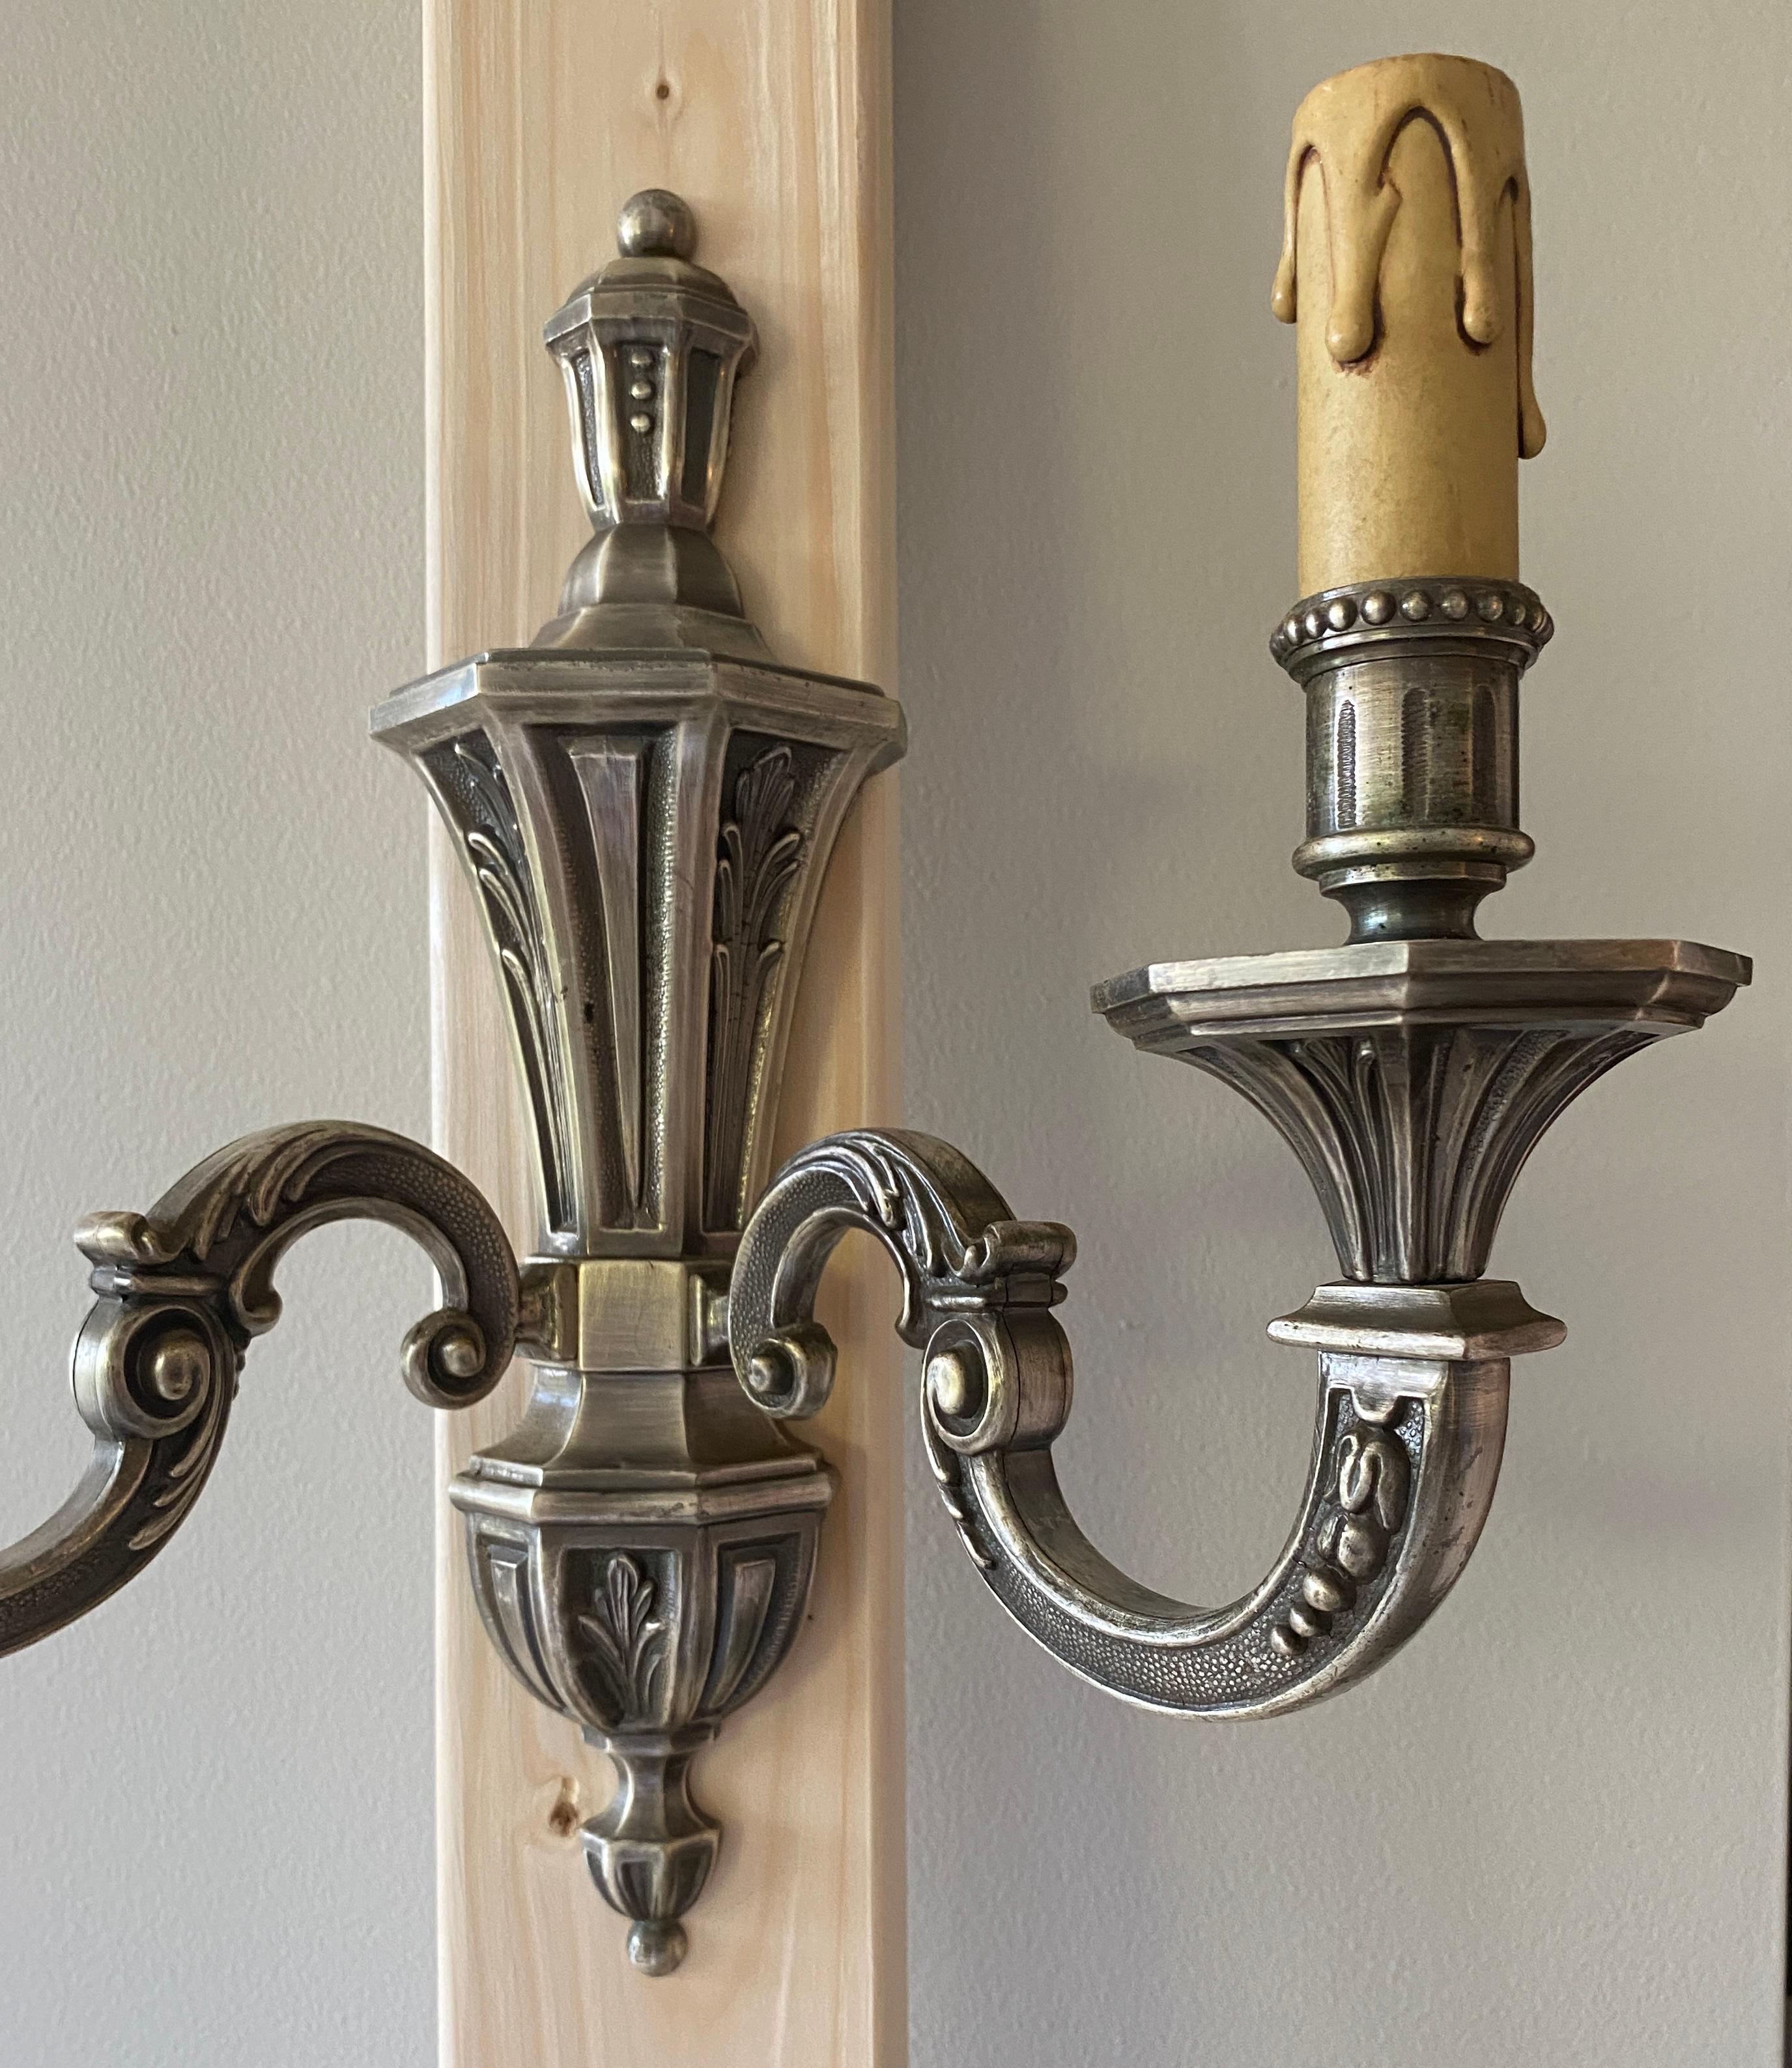 Set of 3 Art Deco or Hollywood Regency style silvered bronze two arm wall sconces.  

Beautiful decorative design, hard wired.
Very good quality and well cast. Stamped.

Dimensions:  
6.38 in. Deep x 12.75